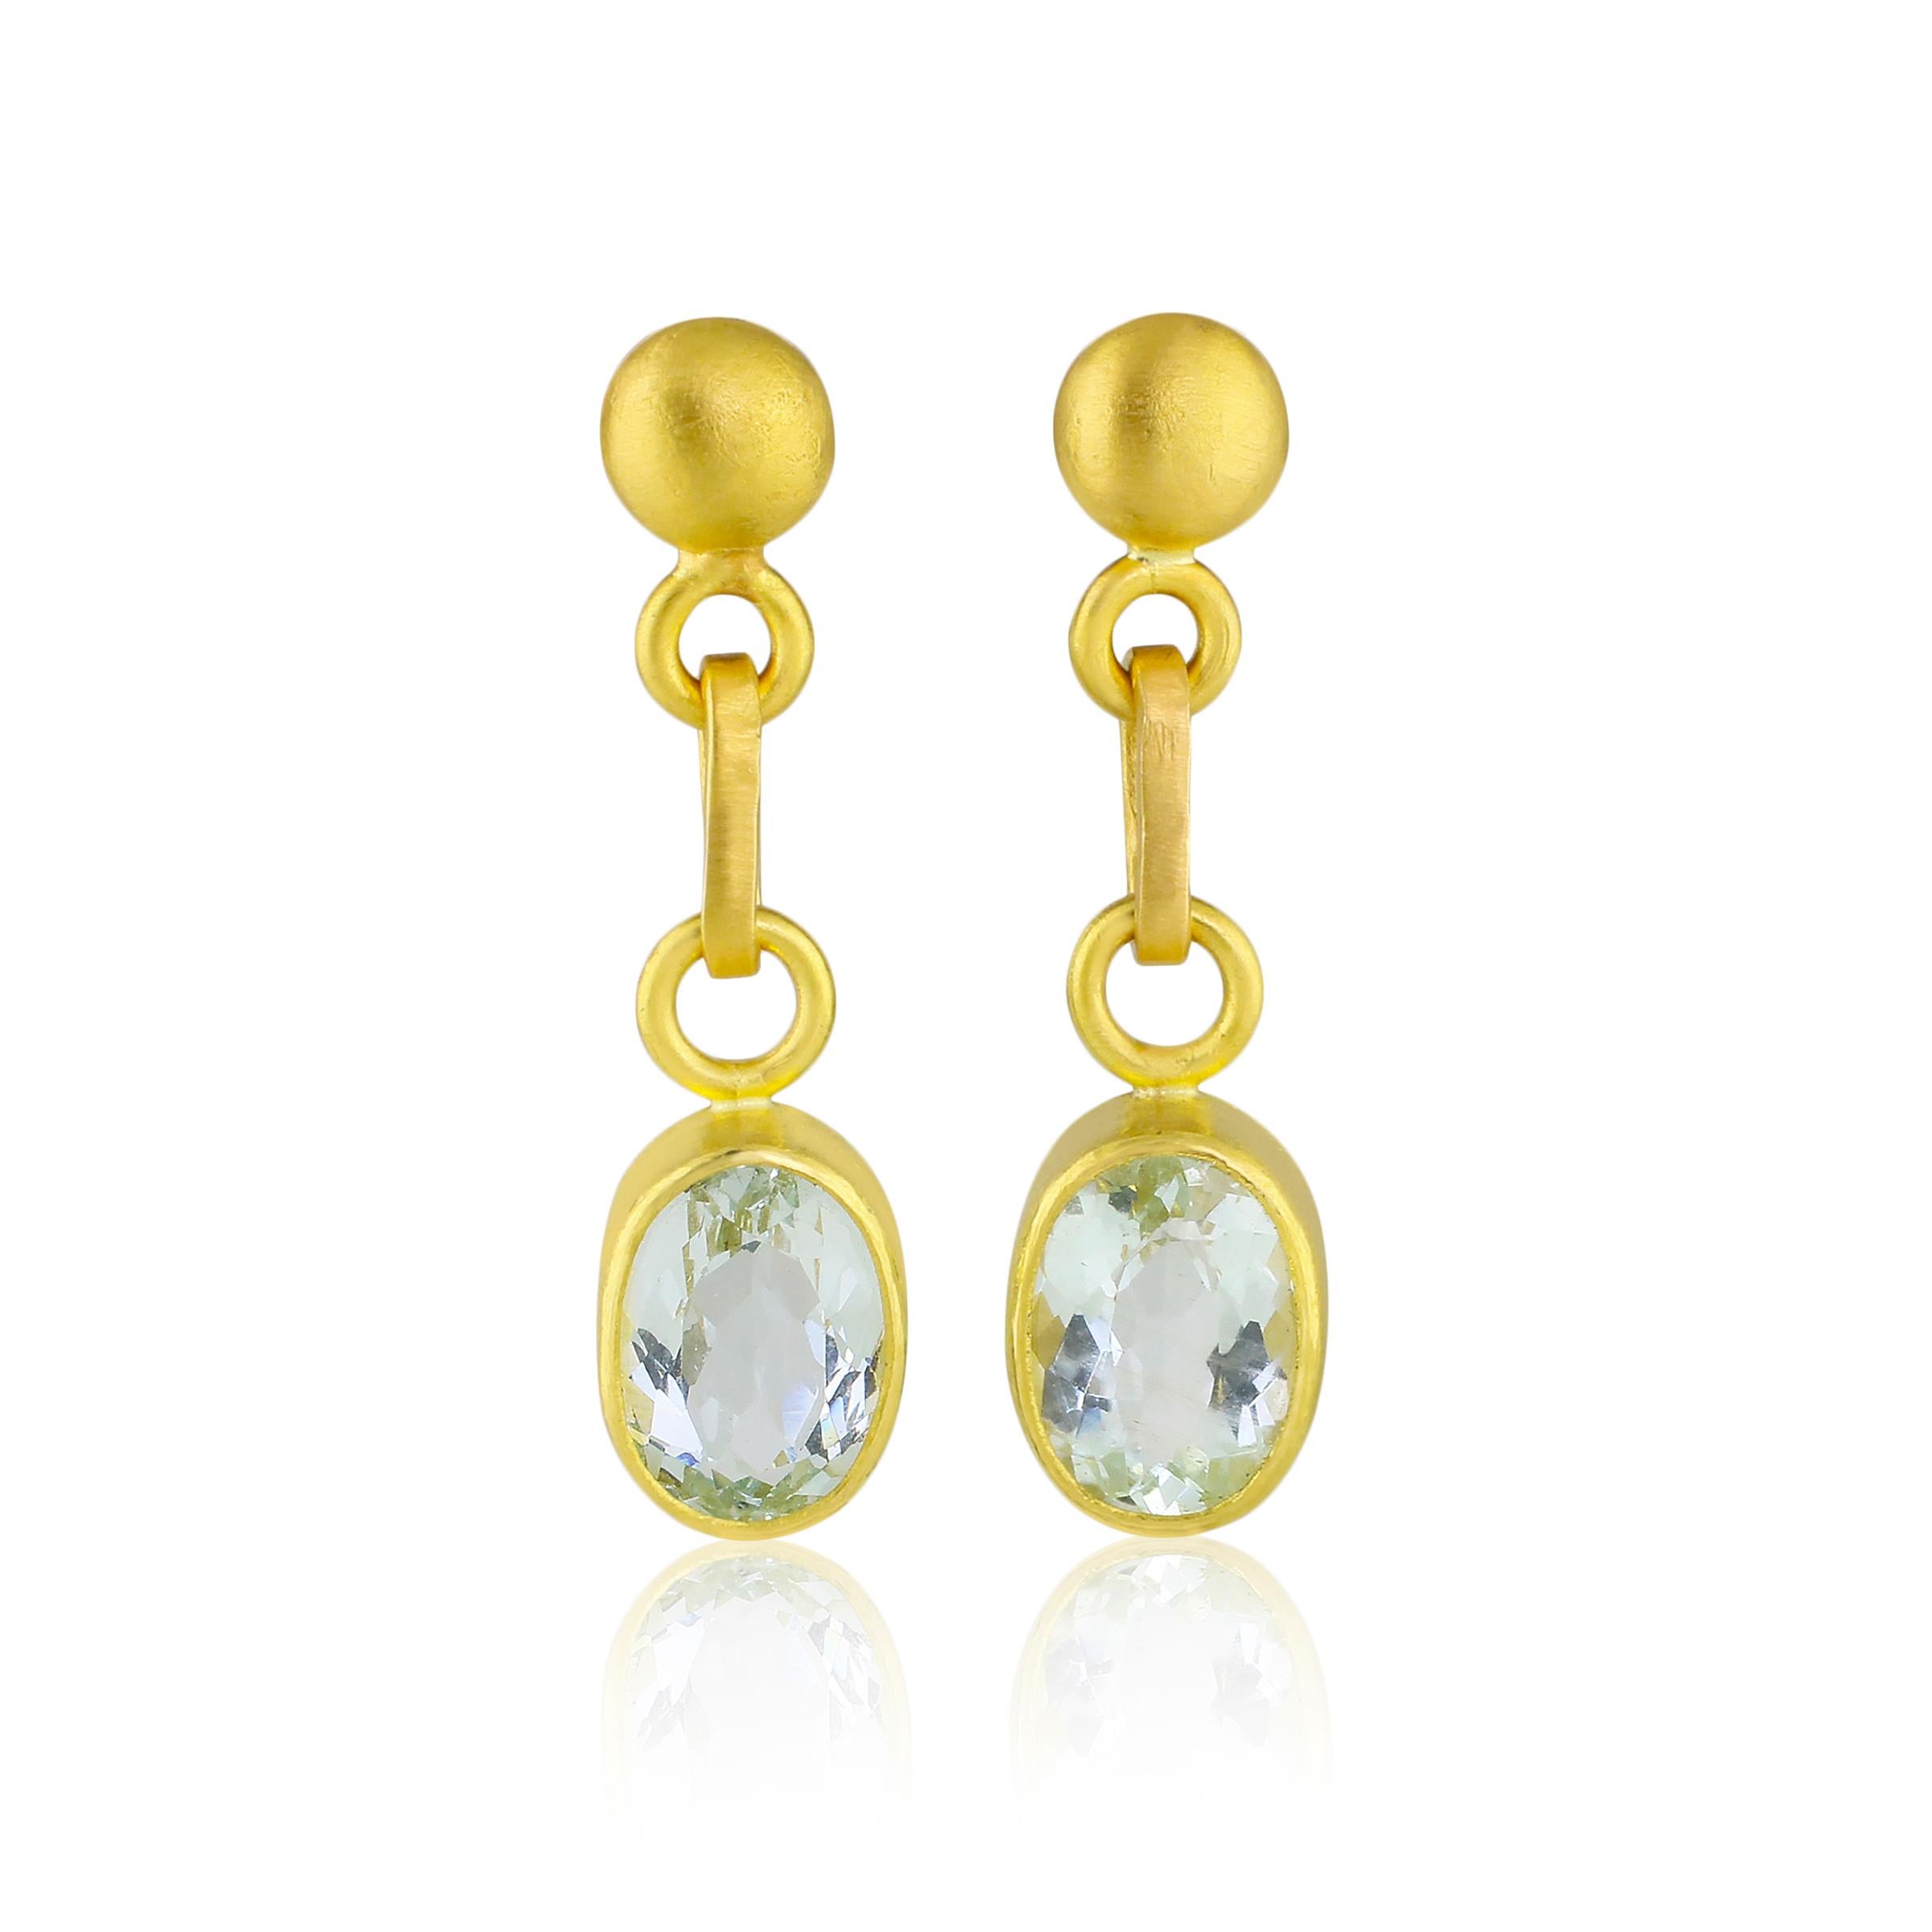 PHILIPPE SPENCER - Pure 22K Gold One-Of-A-Kind Dangling Statement Earrings with backless set 6.62 Ct. Total Oval Aquamarines. 18K Post Back & Friction Nut for durability.

These beautiful and unique Hand-Forged Dangling Statement Earrings are 1.5